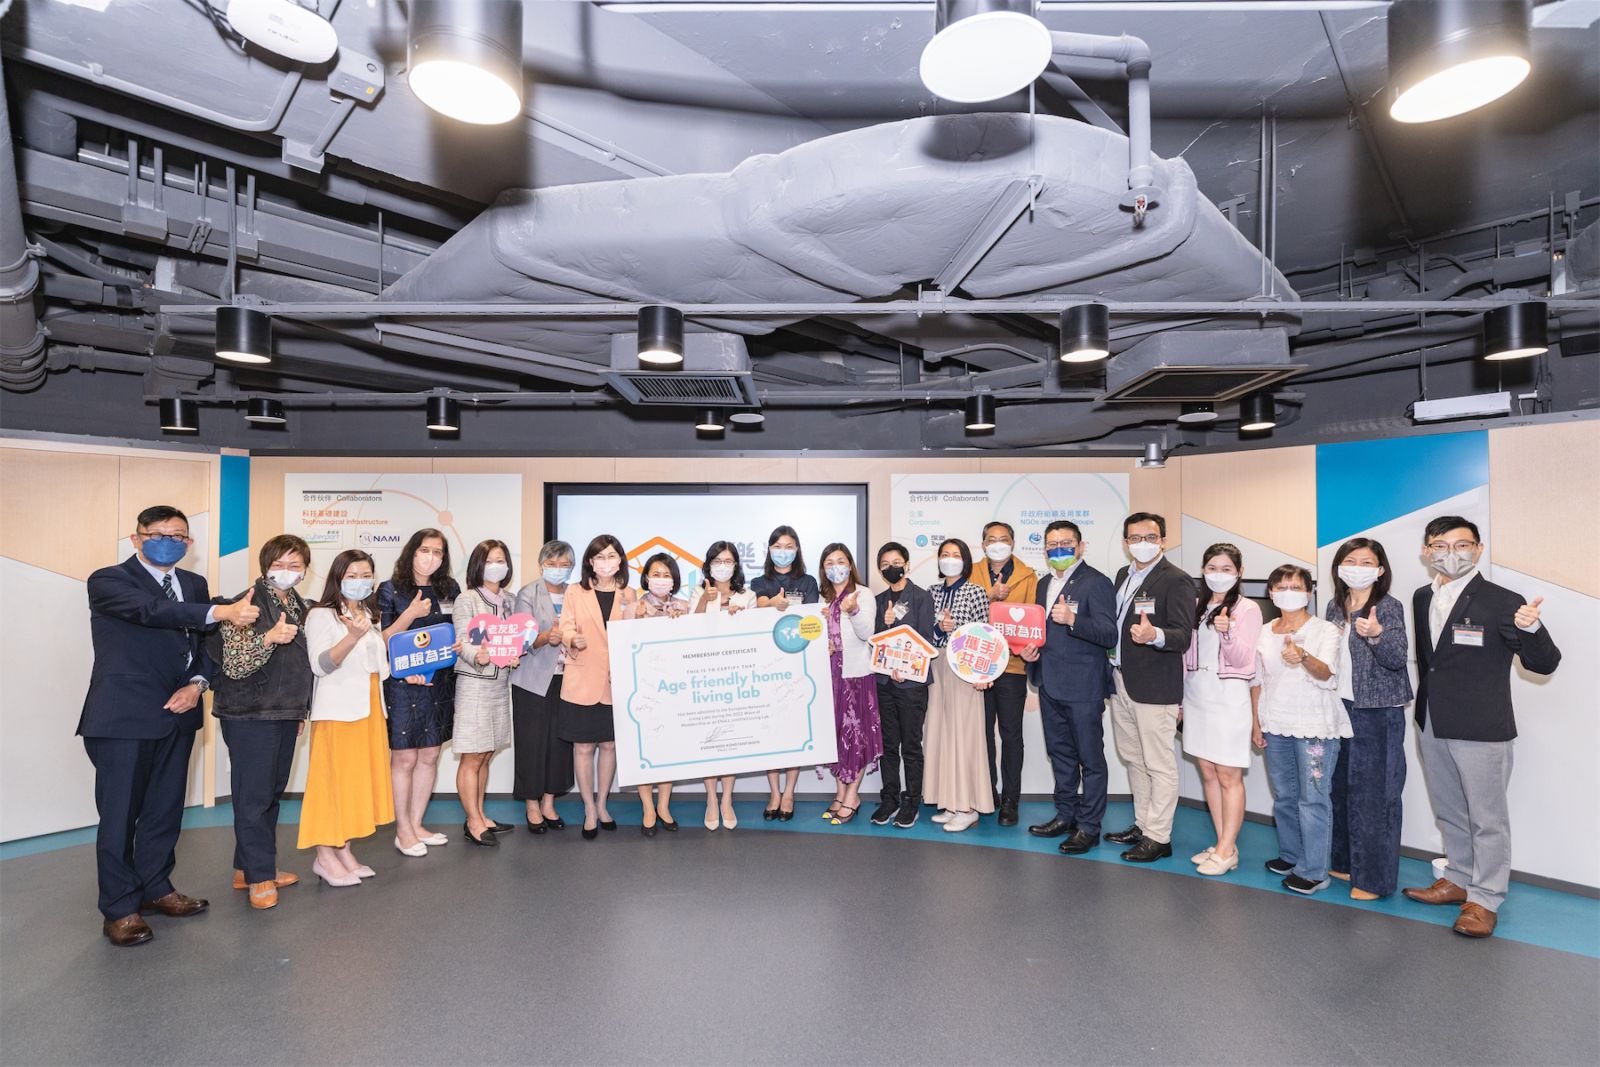 3. The group photo of Steering Committee Members and Collaborators indicated Living Lab connects and bridges different stakeholders to co-create greater age-friendly solutions.